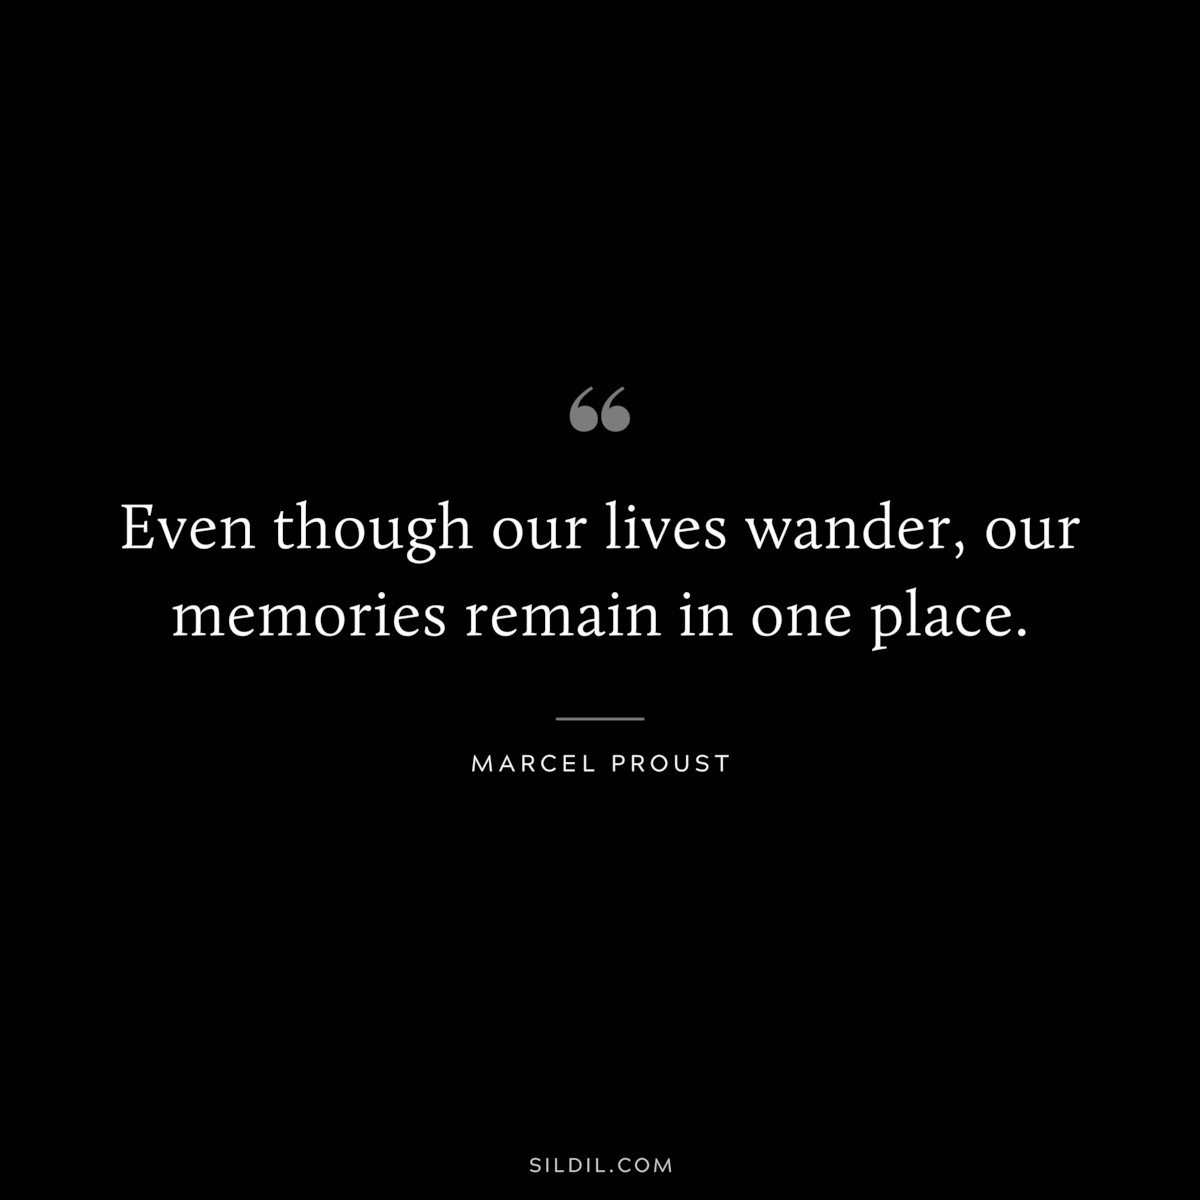 Even though our lives wander, our memories remain in one place. ― Marcel Proust